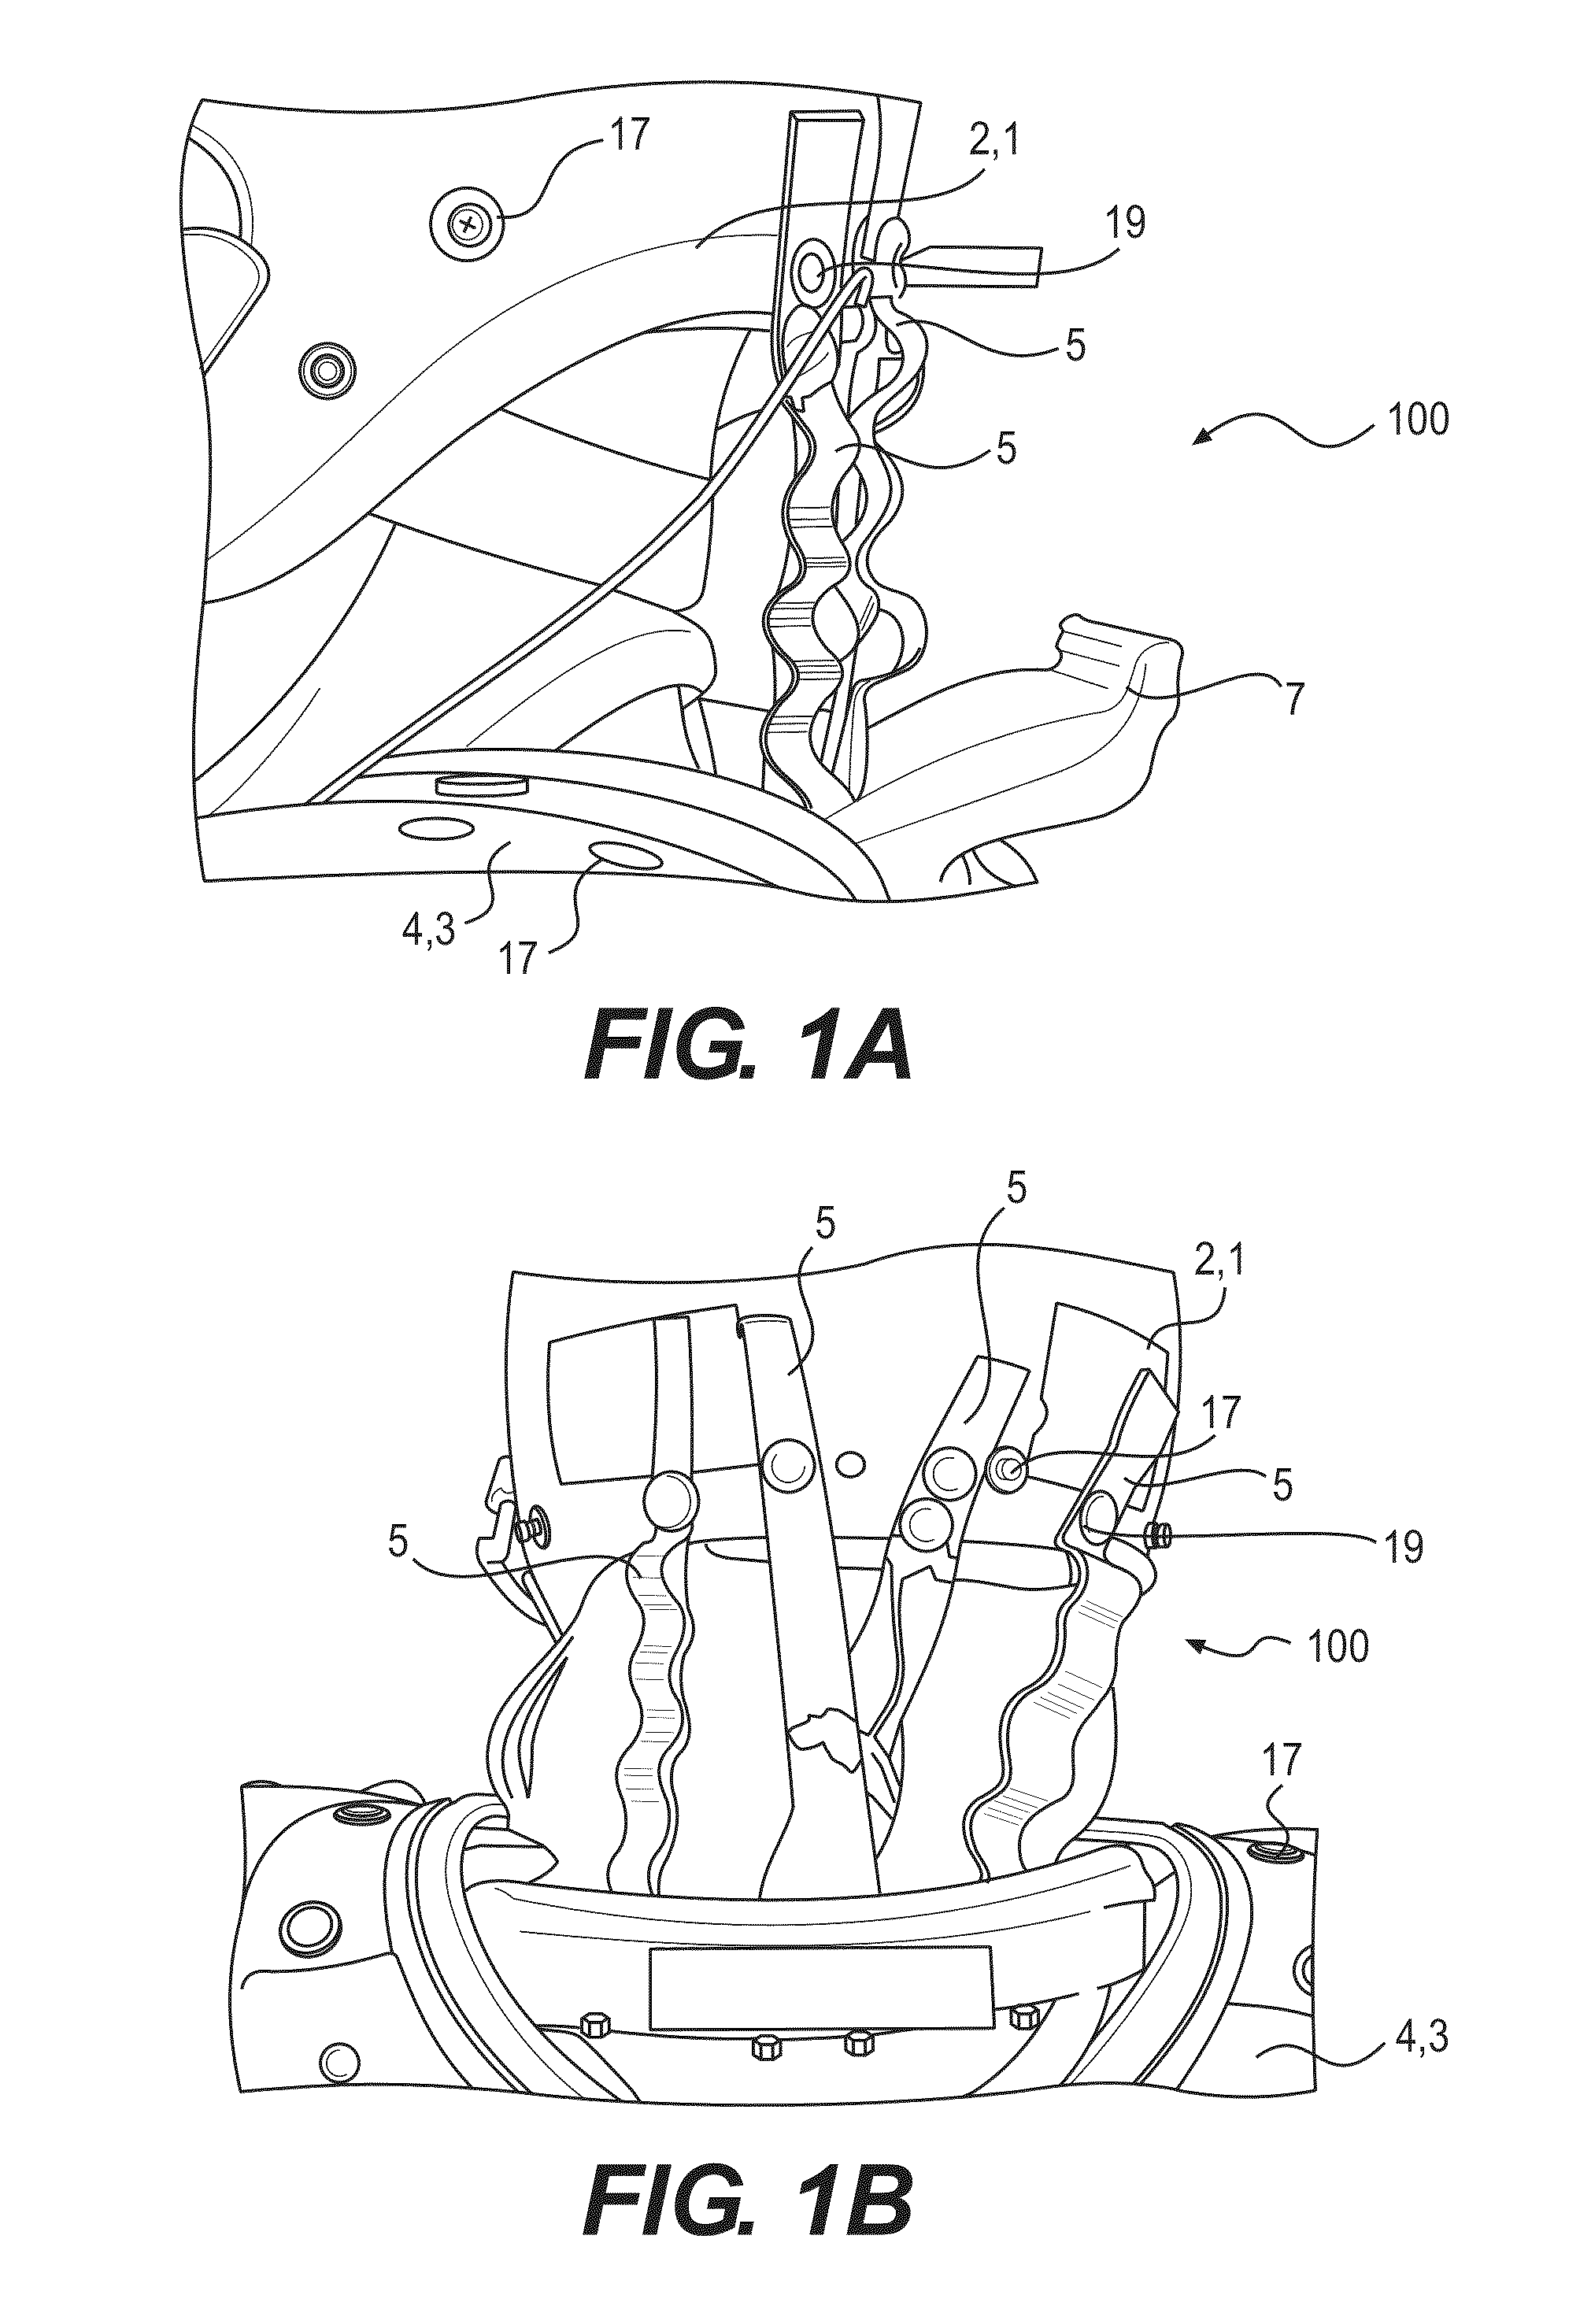 Cervical spine protection apparatus and methods of use